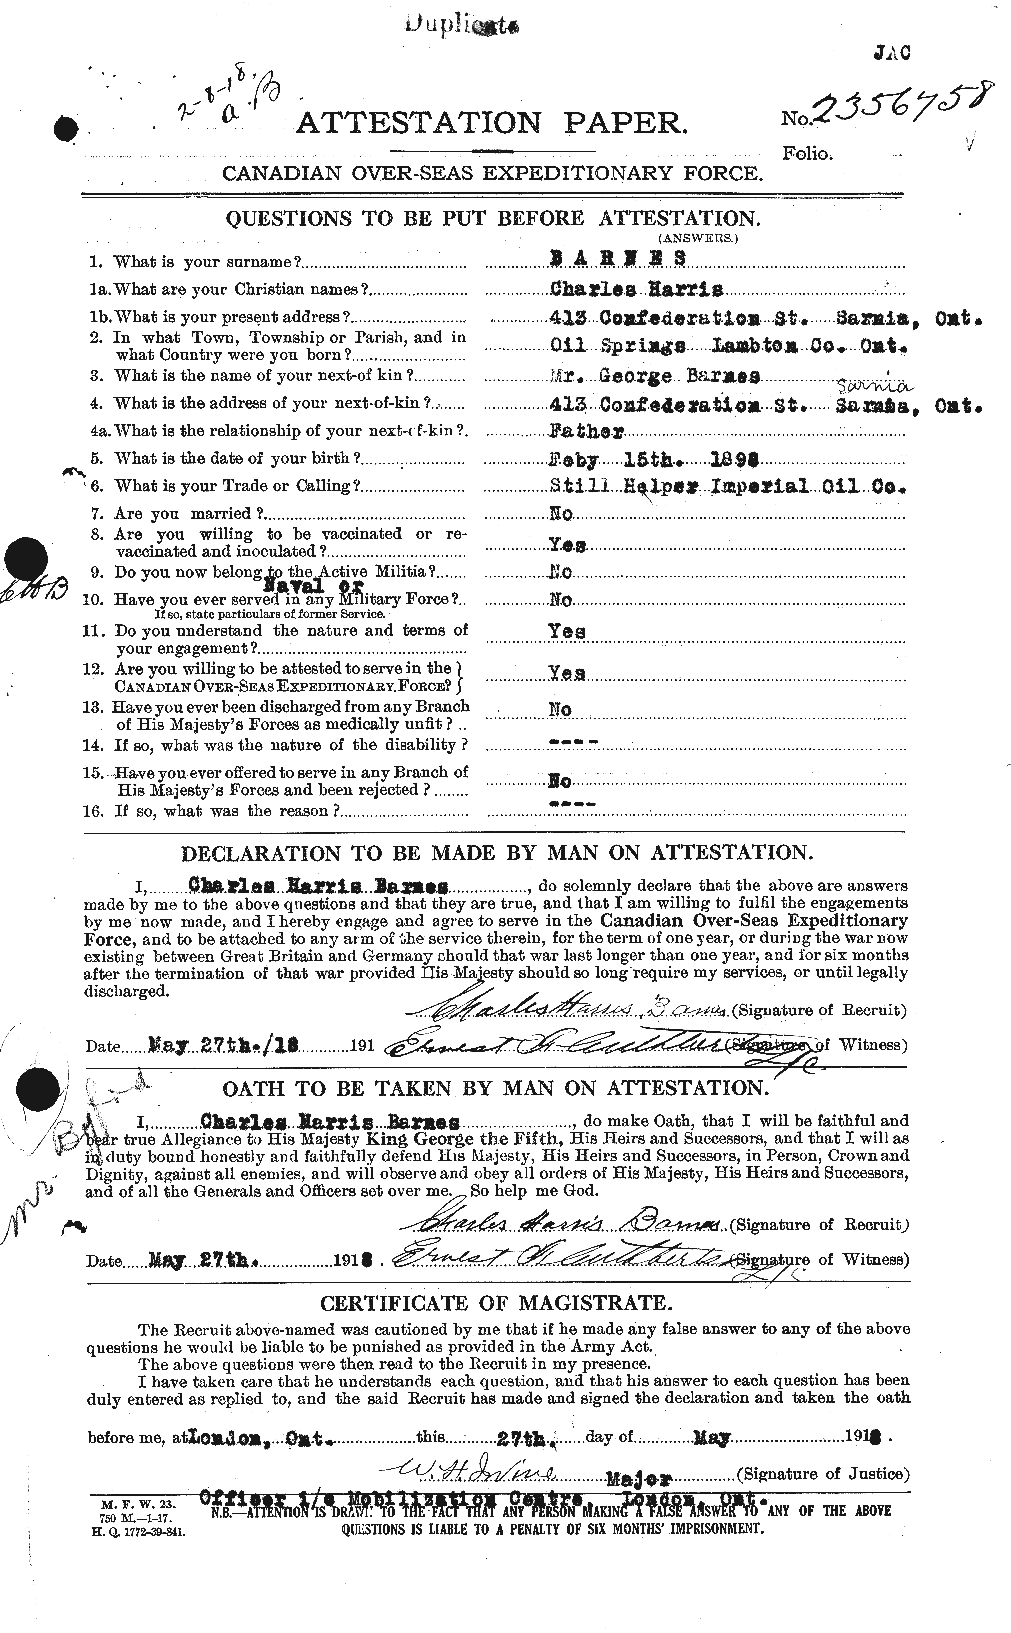 Personnel Records of the First World War - CEF 222621a